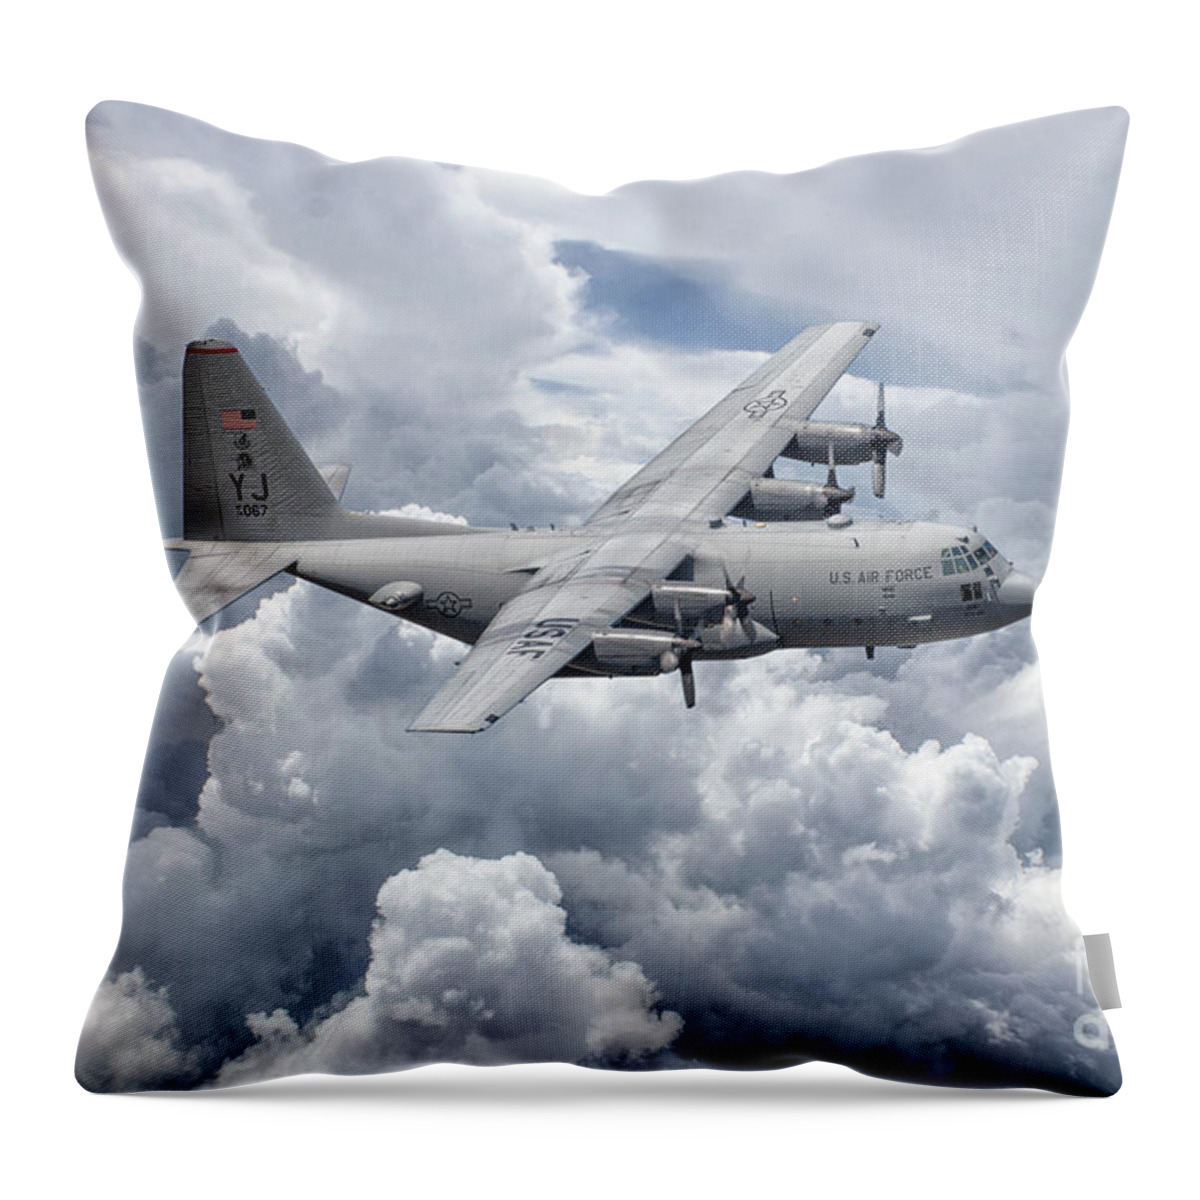 C130 Throw Pillow featuring the digital art C130 36th Airlift by Airpower Art